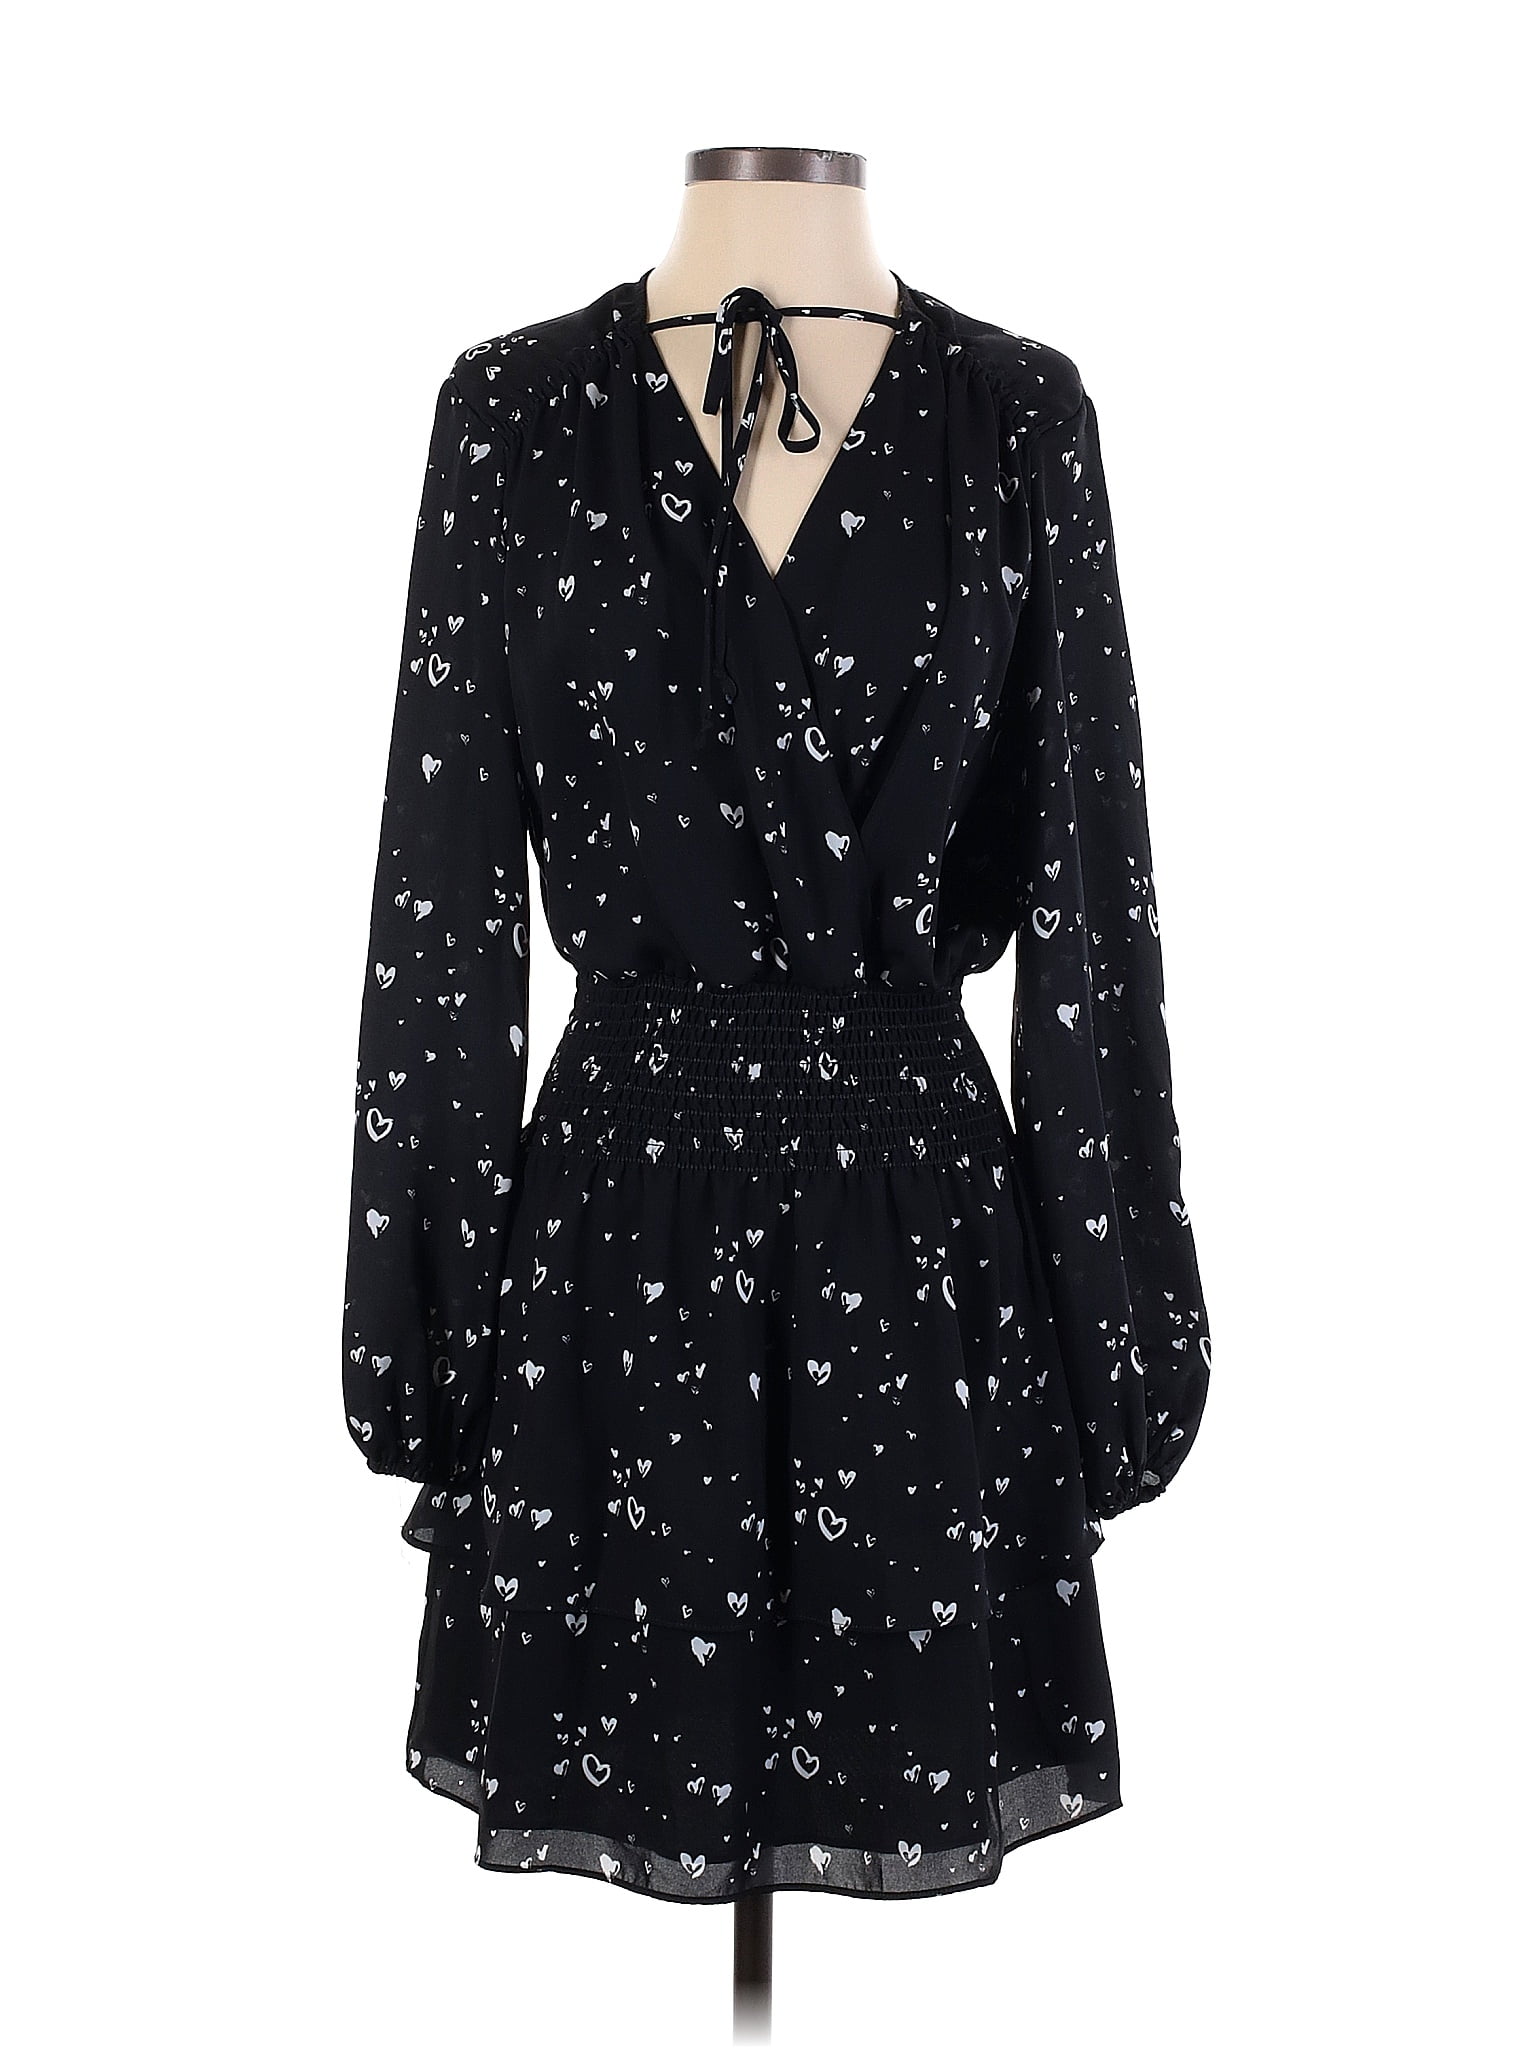 Black Betty Dress by Reformation for $38